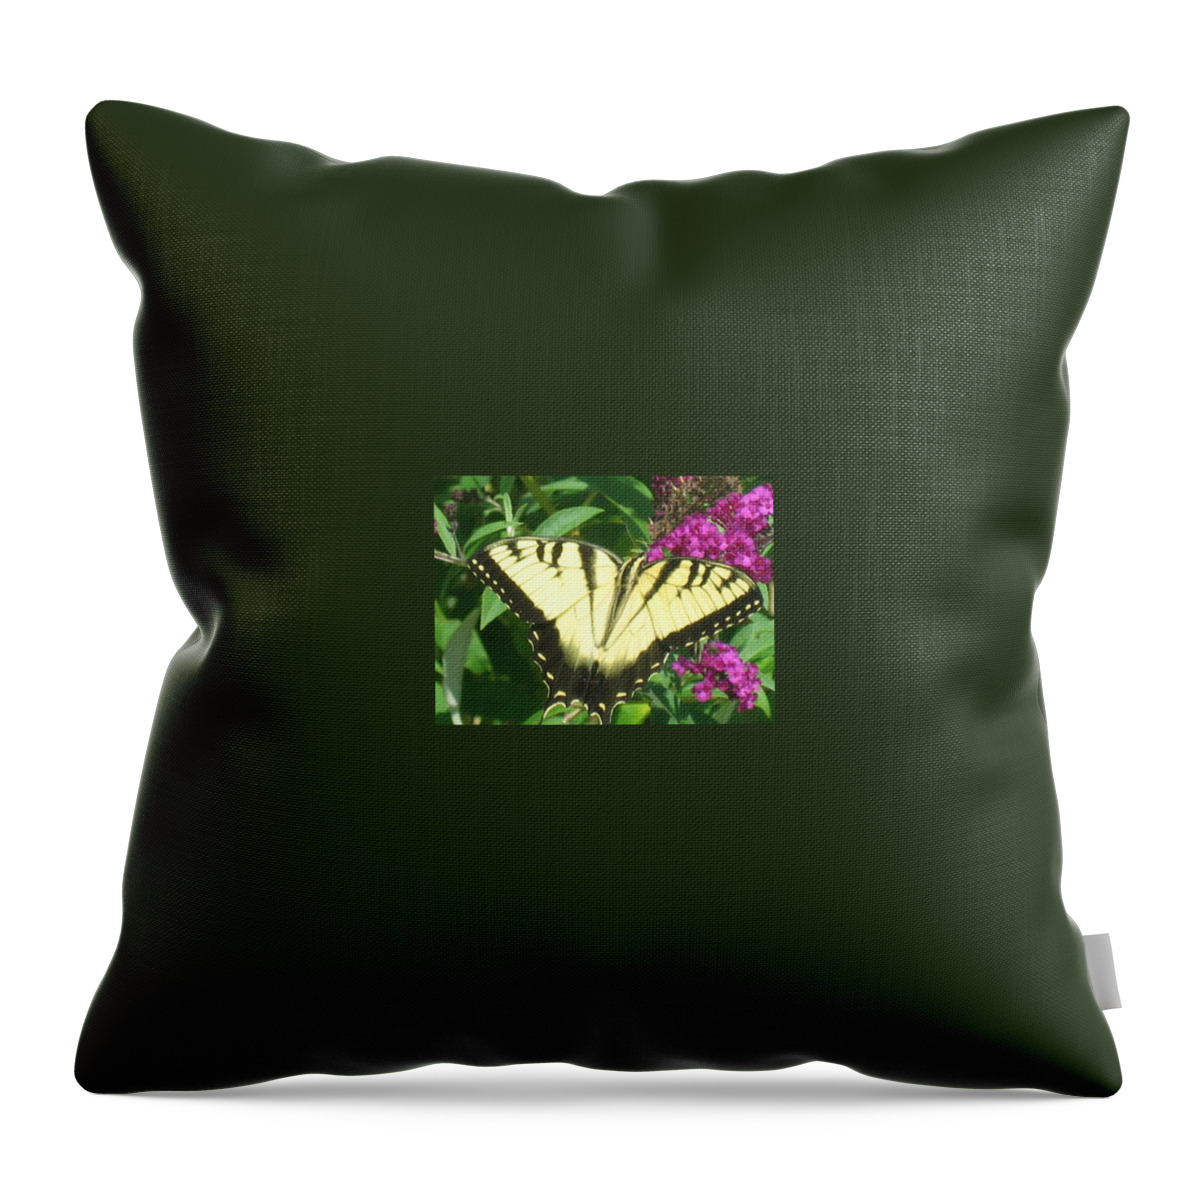 Butterfly Throw Pillow featuring the photograph Tiger Swallowtail by Belinda Stucki